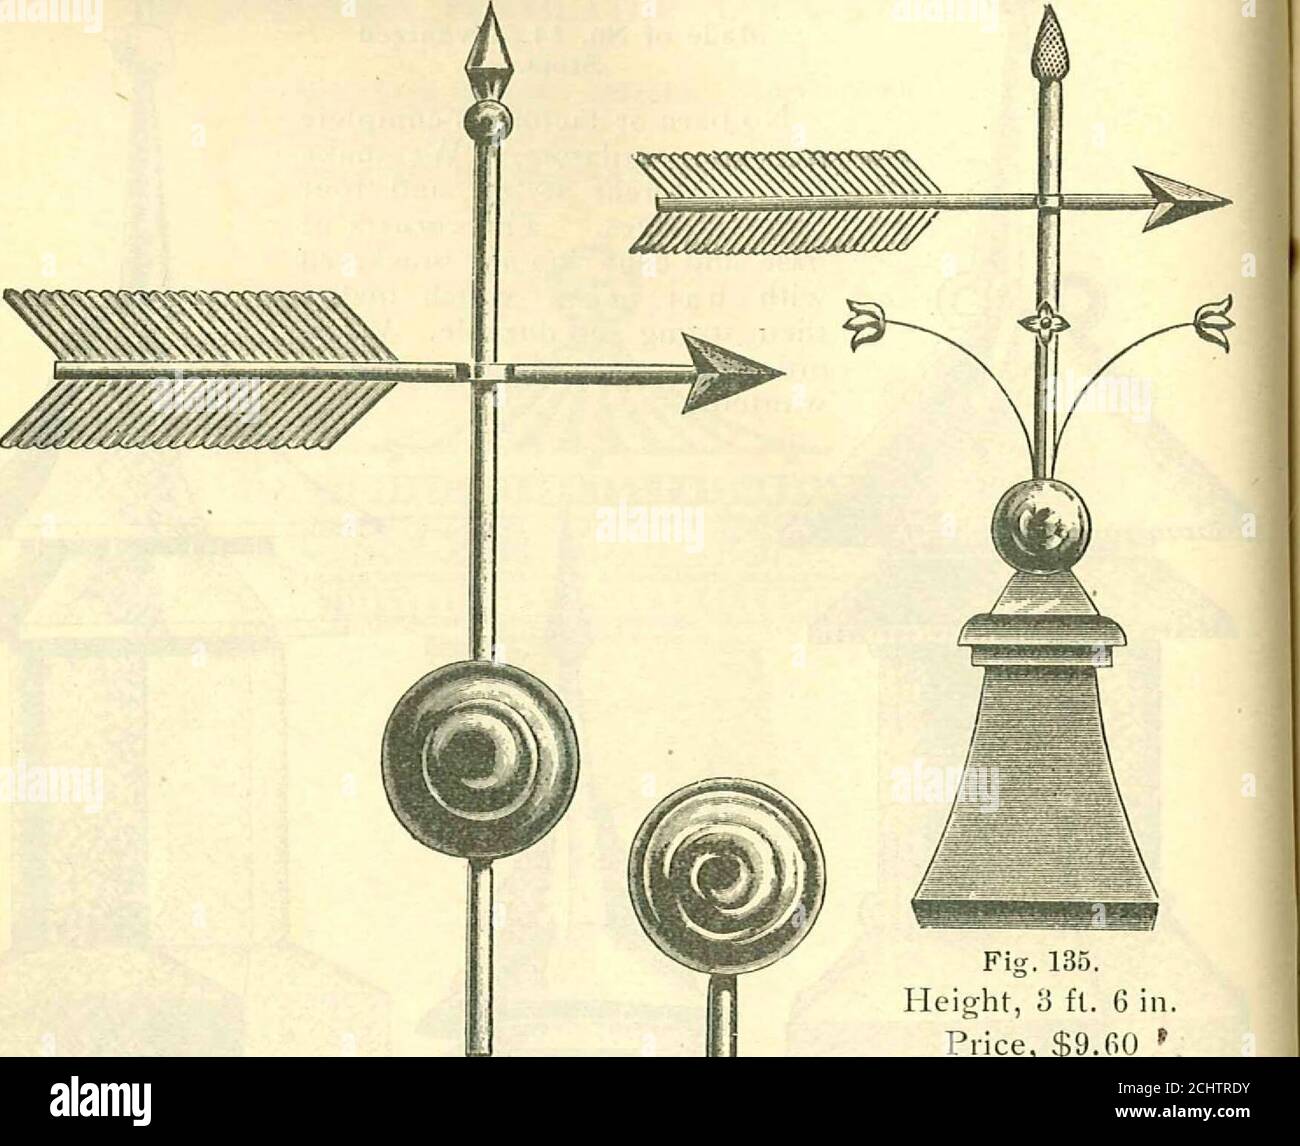 . Roofing Catalog No. 9 . If 1 V ■■ ■ M ■ /f; Fig. 172.si.e. PRICE LIST. No. 1—18-inch Base, 12-inch Drum, 5 feet high $12.75 No. 2—22-inch Base, 15-inch Drum, 6^ feet high 15.00 No. 3—28-inch Base, 21-inch Drum, 8£ feet high 18.00 No. 4—35.inch Base, 29-inch Drum, 11 feet high 22.50 Crating charged for at cost.DISCOUNT per cent. 82 E. E. SOUTHER IRON CO., ST. LOUIS. FINIALS AND WEATHER VANES.. Fig. 134.Height, 4 feet. Price $8.40 Fig. 135.Height, 3 ft. 6 in.Price, $9.60 V M^m^ Stock Photo